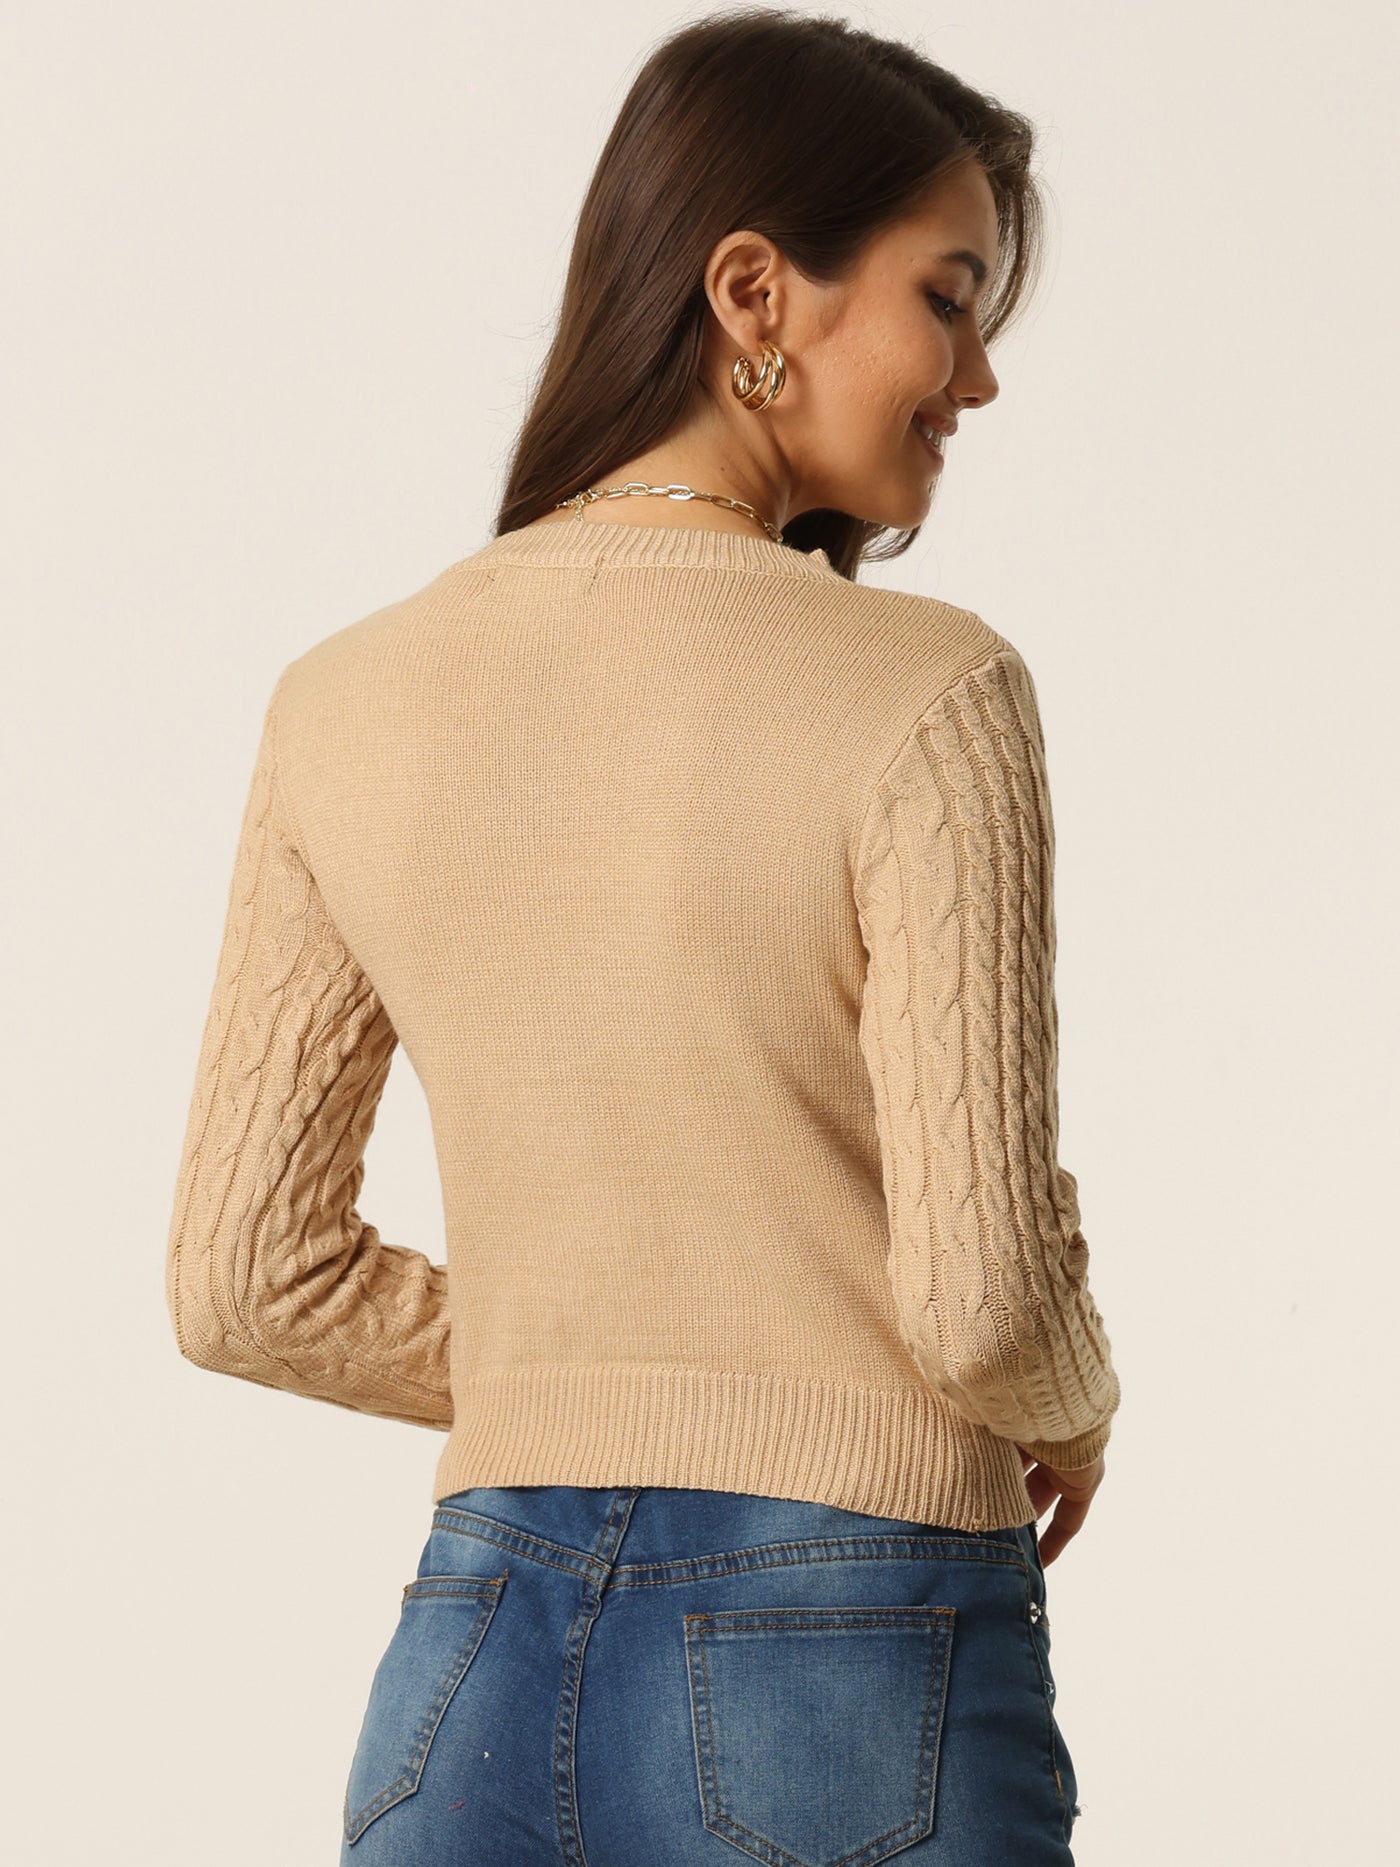 Bublédon Womens' Fall Winter Cut Out Front Cable Knit Long Sleeve Crop Sweater